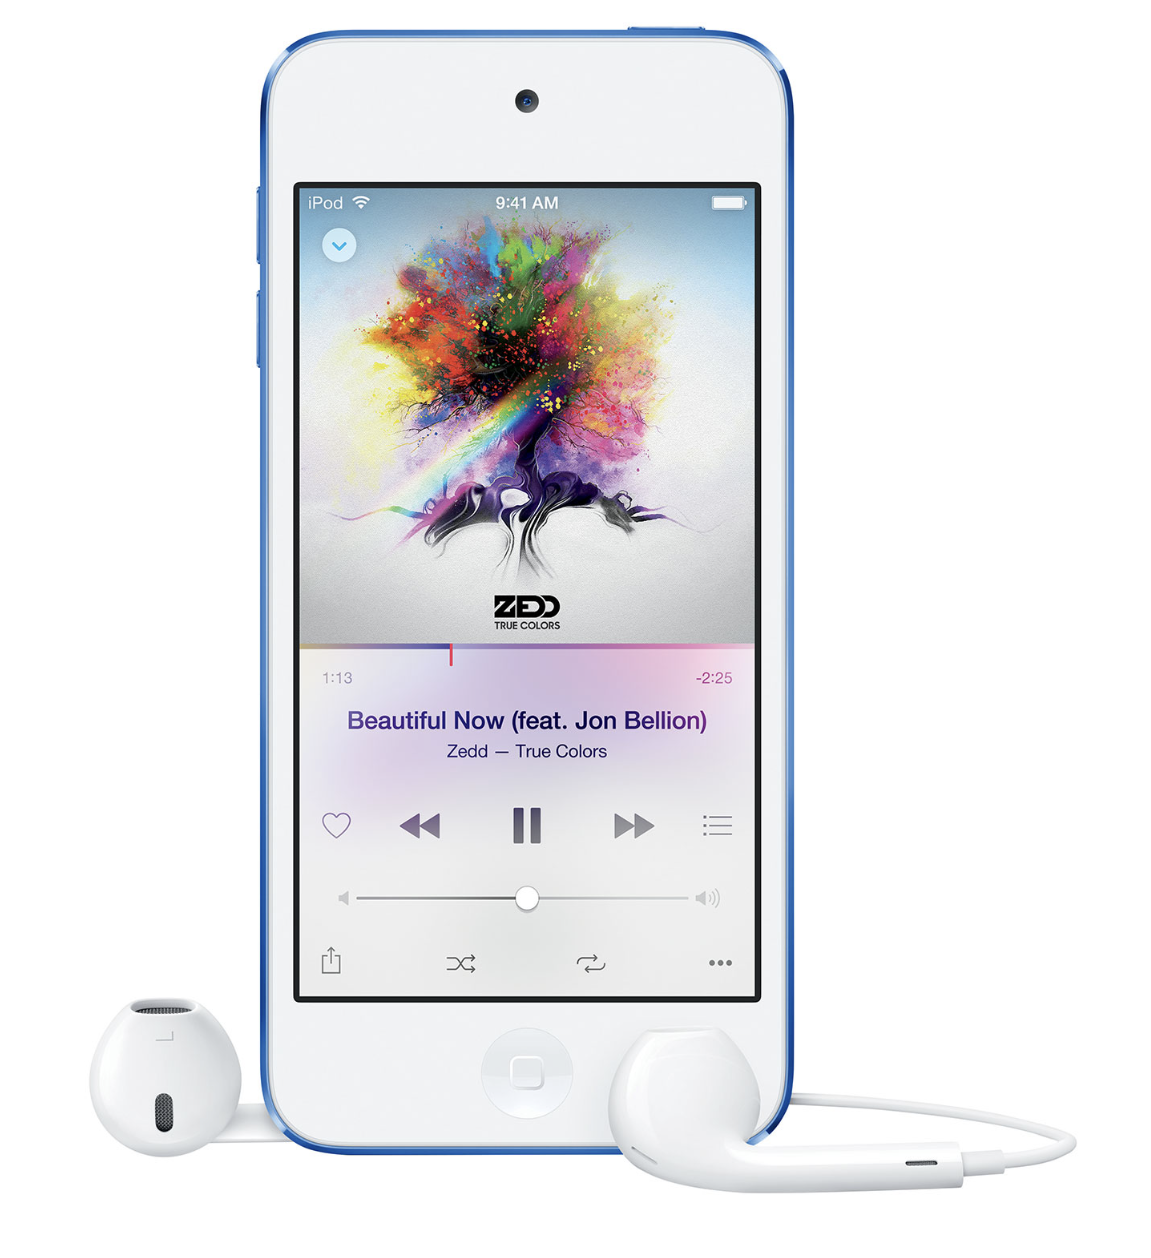 Apple EarPods wrapped around an iPhone showing Apple Music.